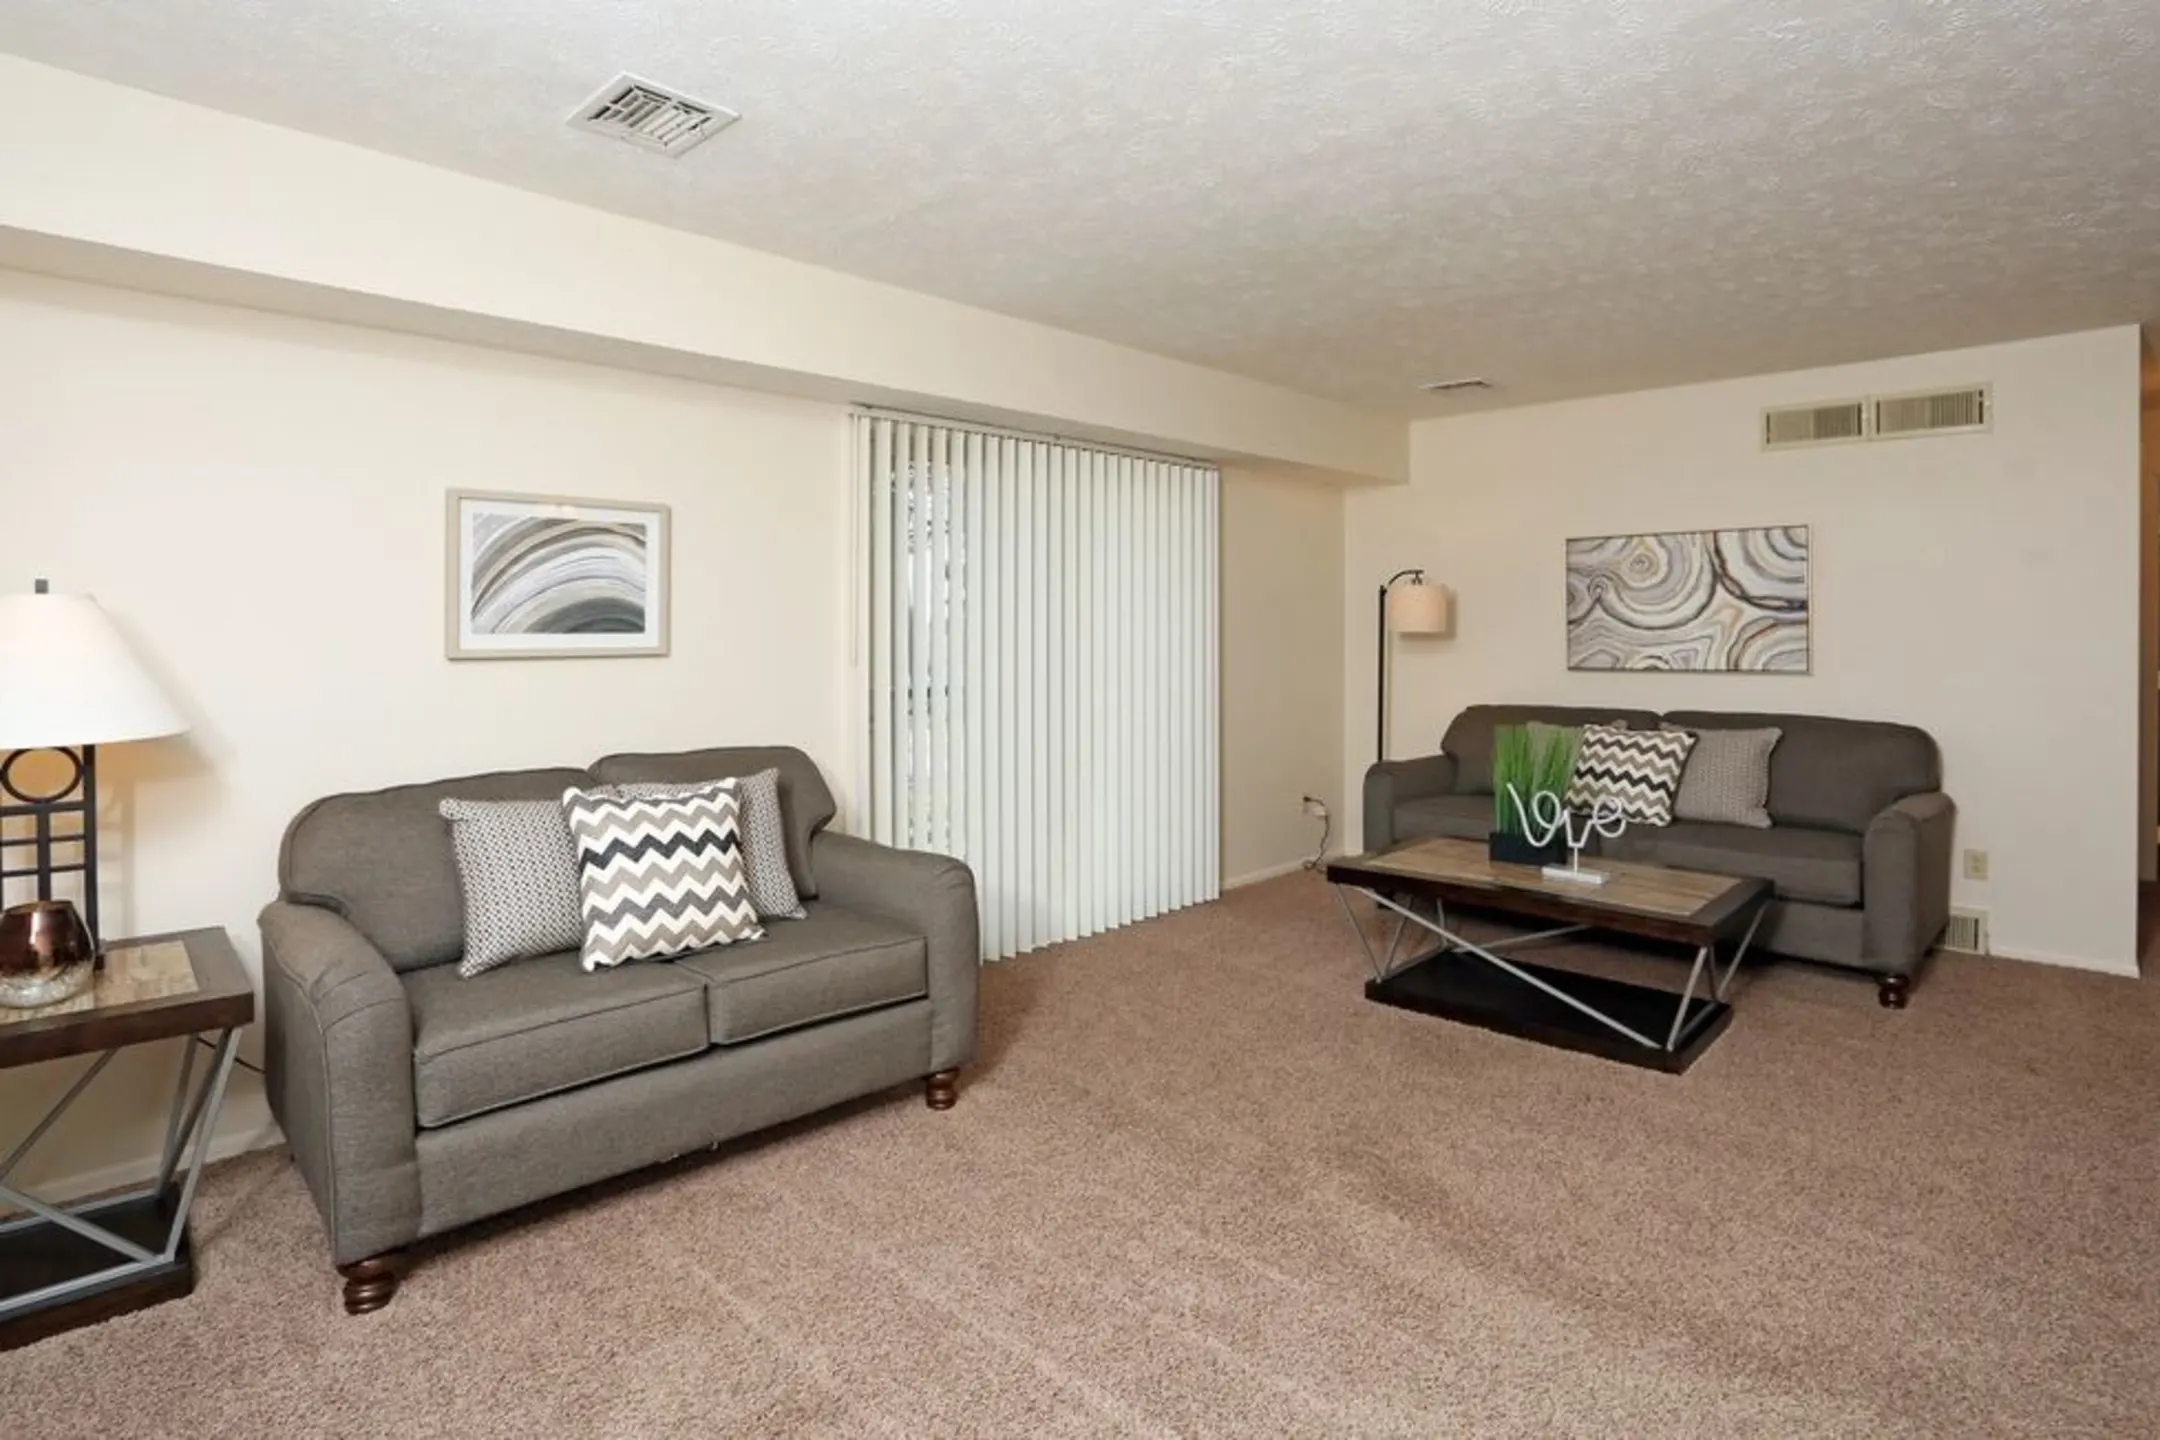 Living Room - Peppertree Apartments - Niles, OH